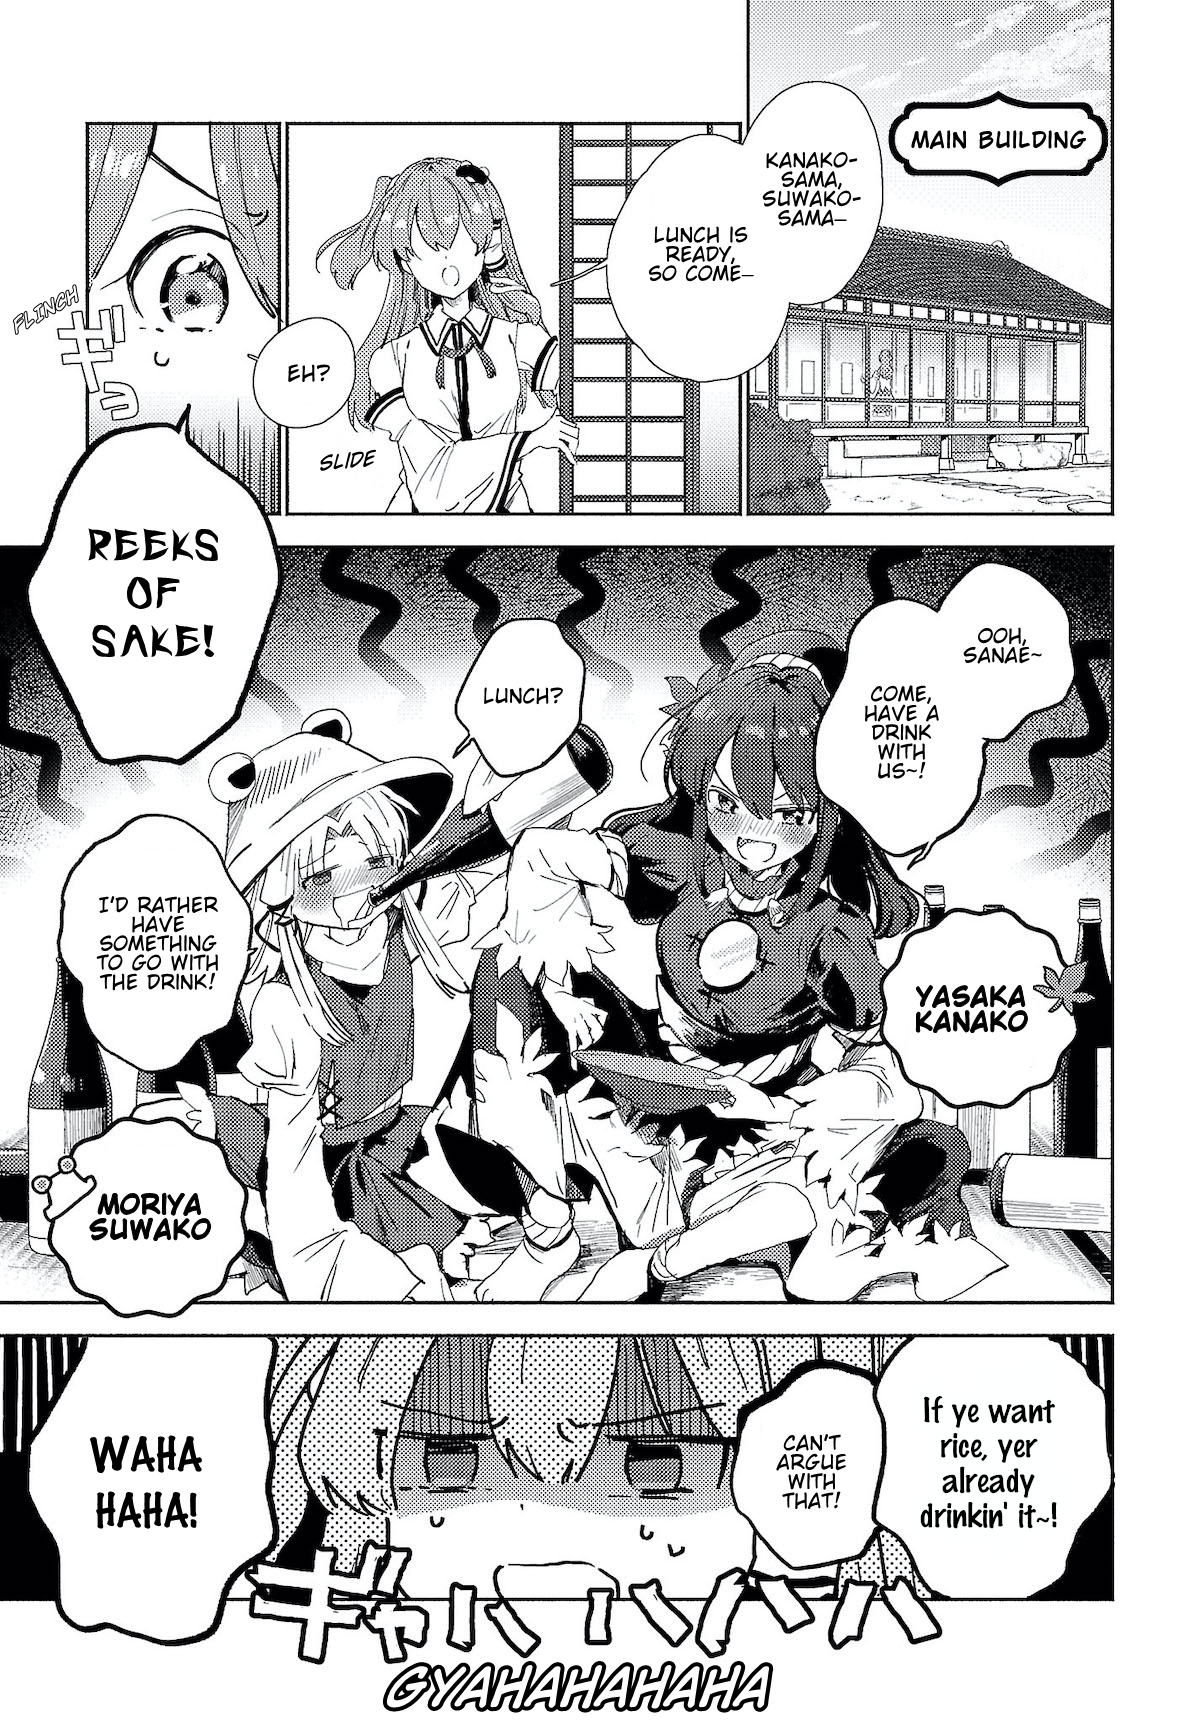 Touhou - Sanae-San Is On The Run! - Page 3